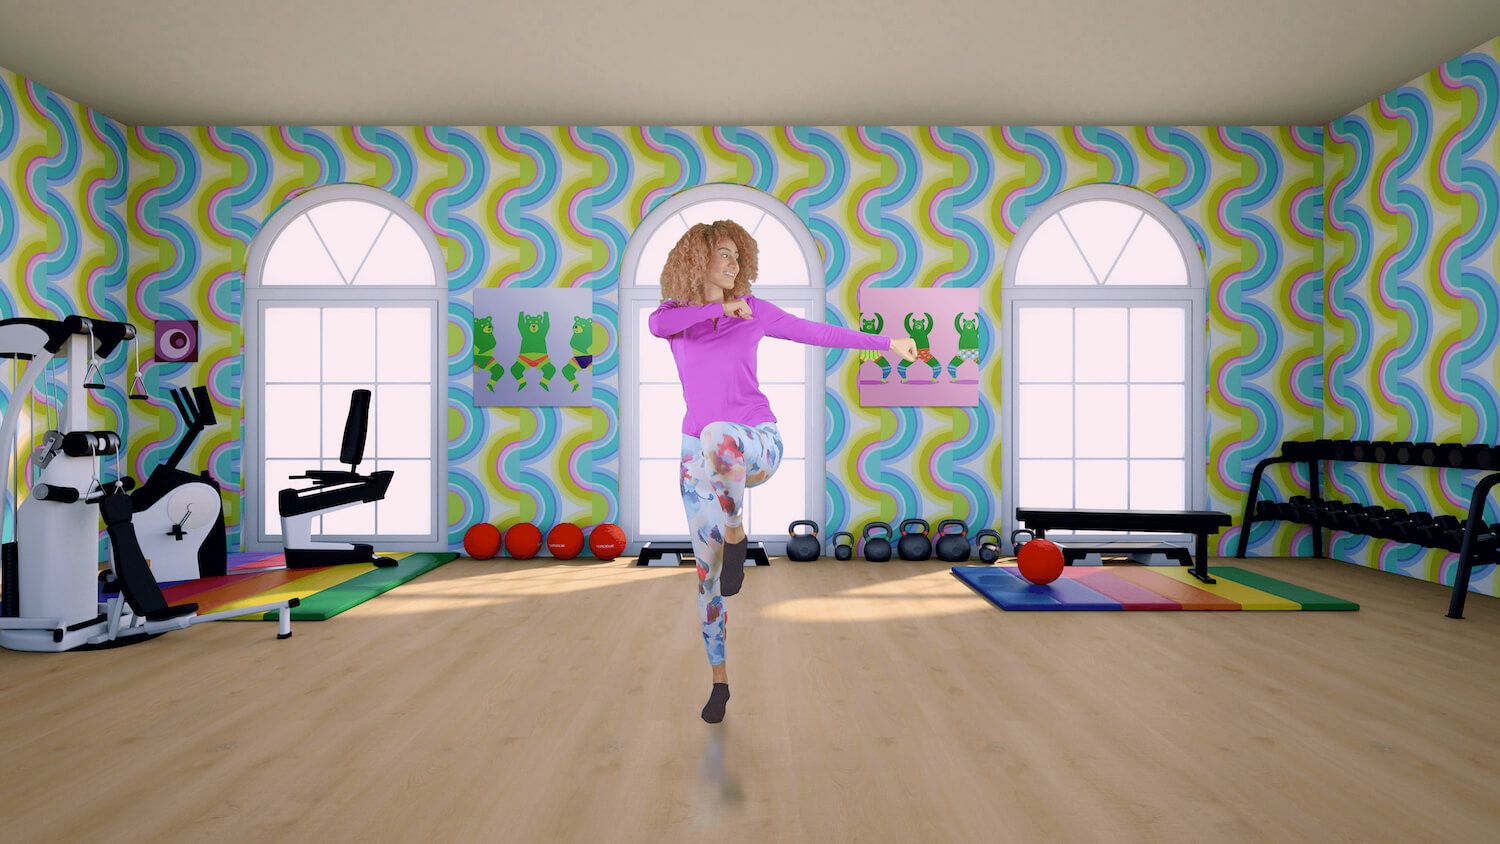 Person doing aerobics in vibrant colorful fitness gym